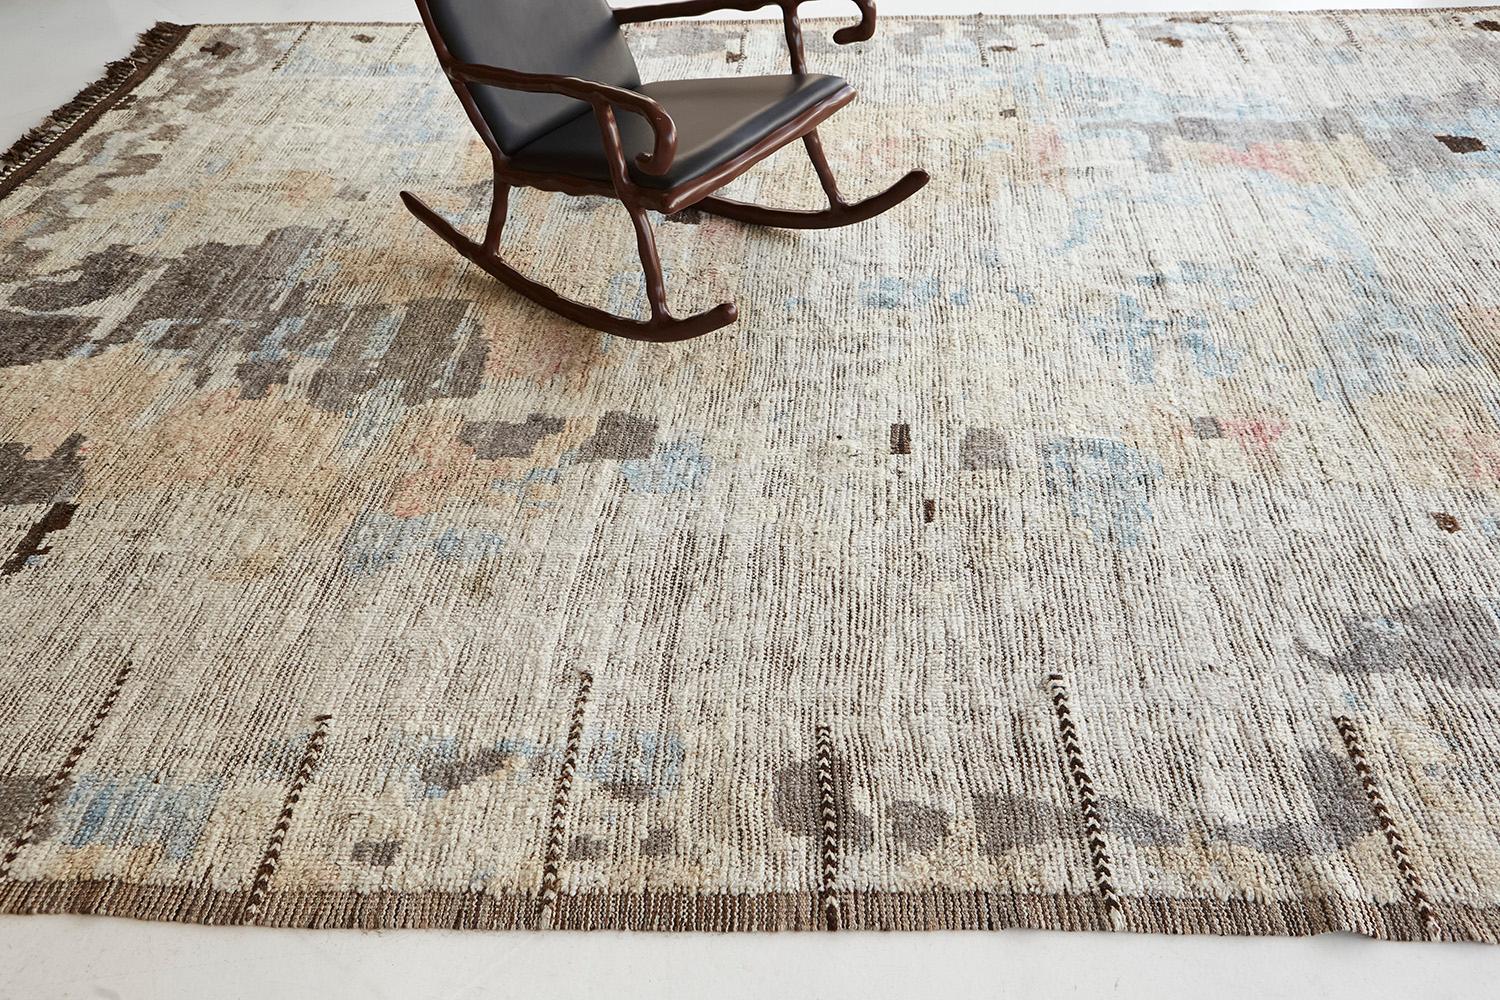 Zazate' is made of luxurious wool and is made of timeless design elements. It's weaving of natural earth tones with vibrant blues and unique design elements is what makes the Atlas Collection so unique and sought after. Mehraban's Atlas collection